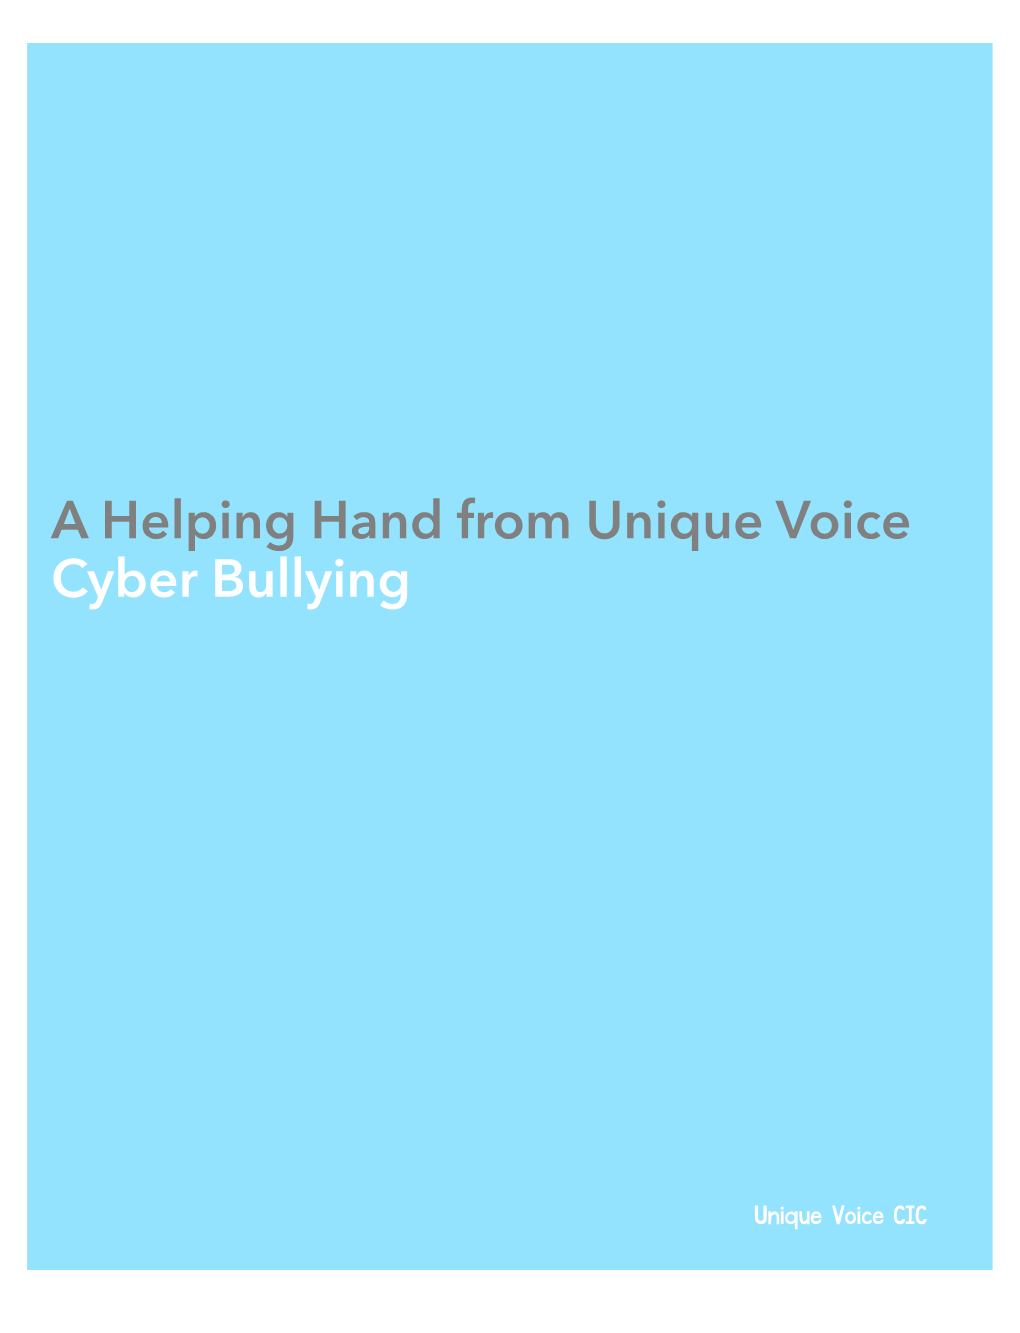 A Helping Hand from Unique Voice Cyber Bullying